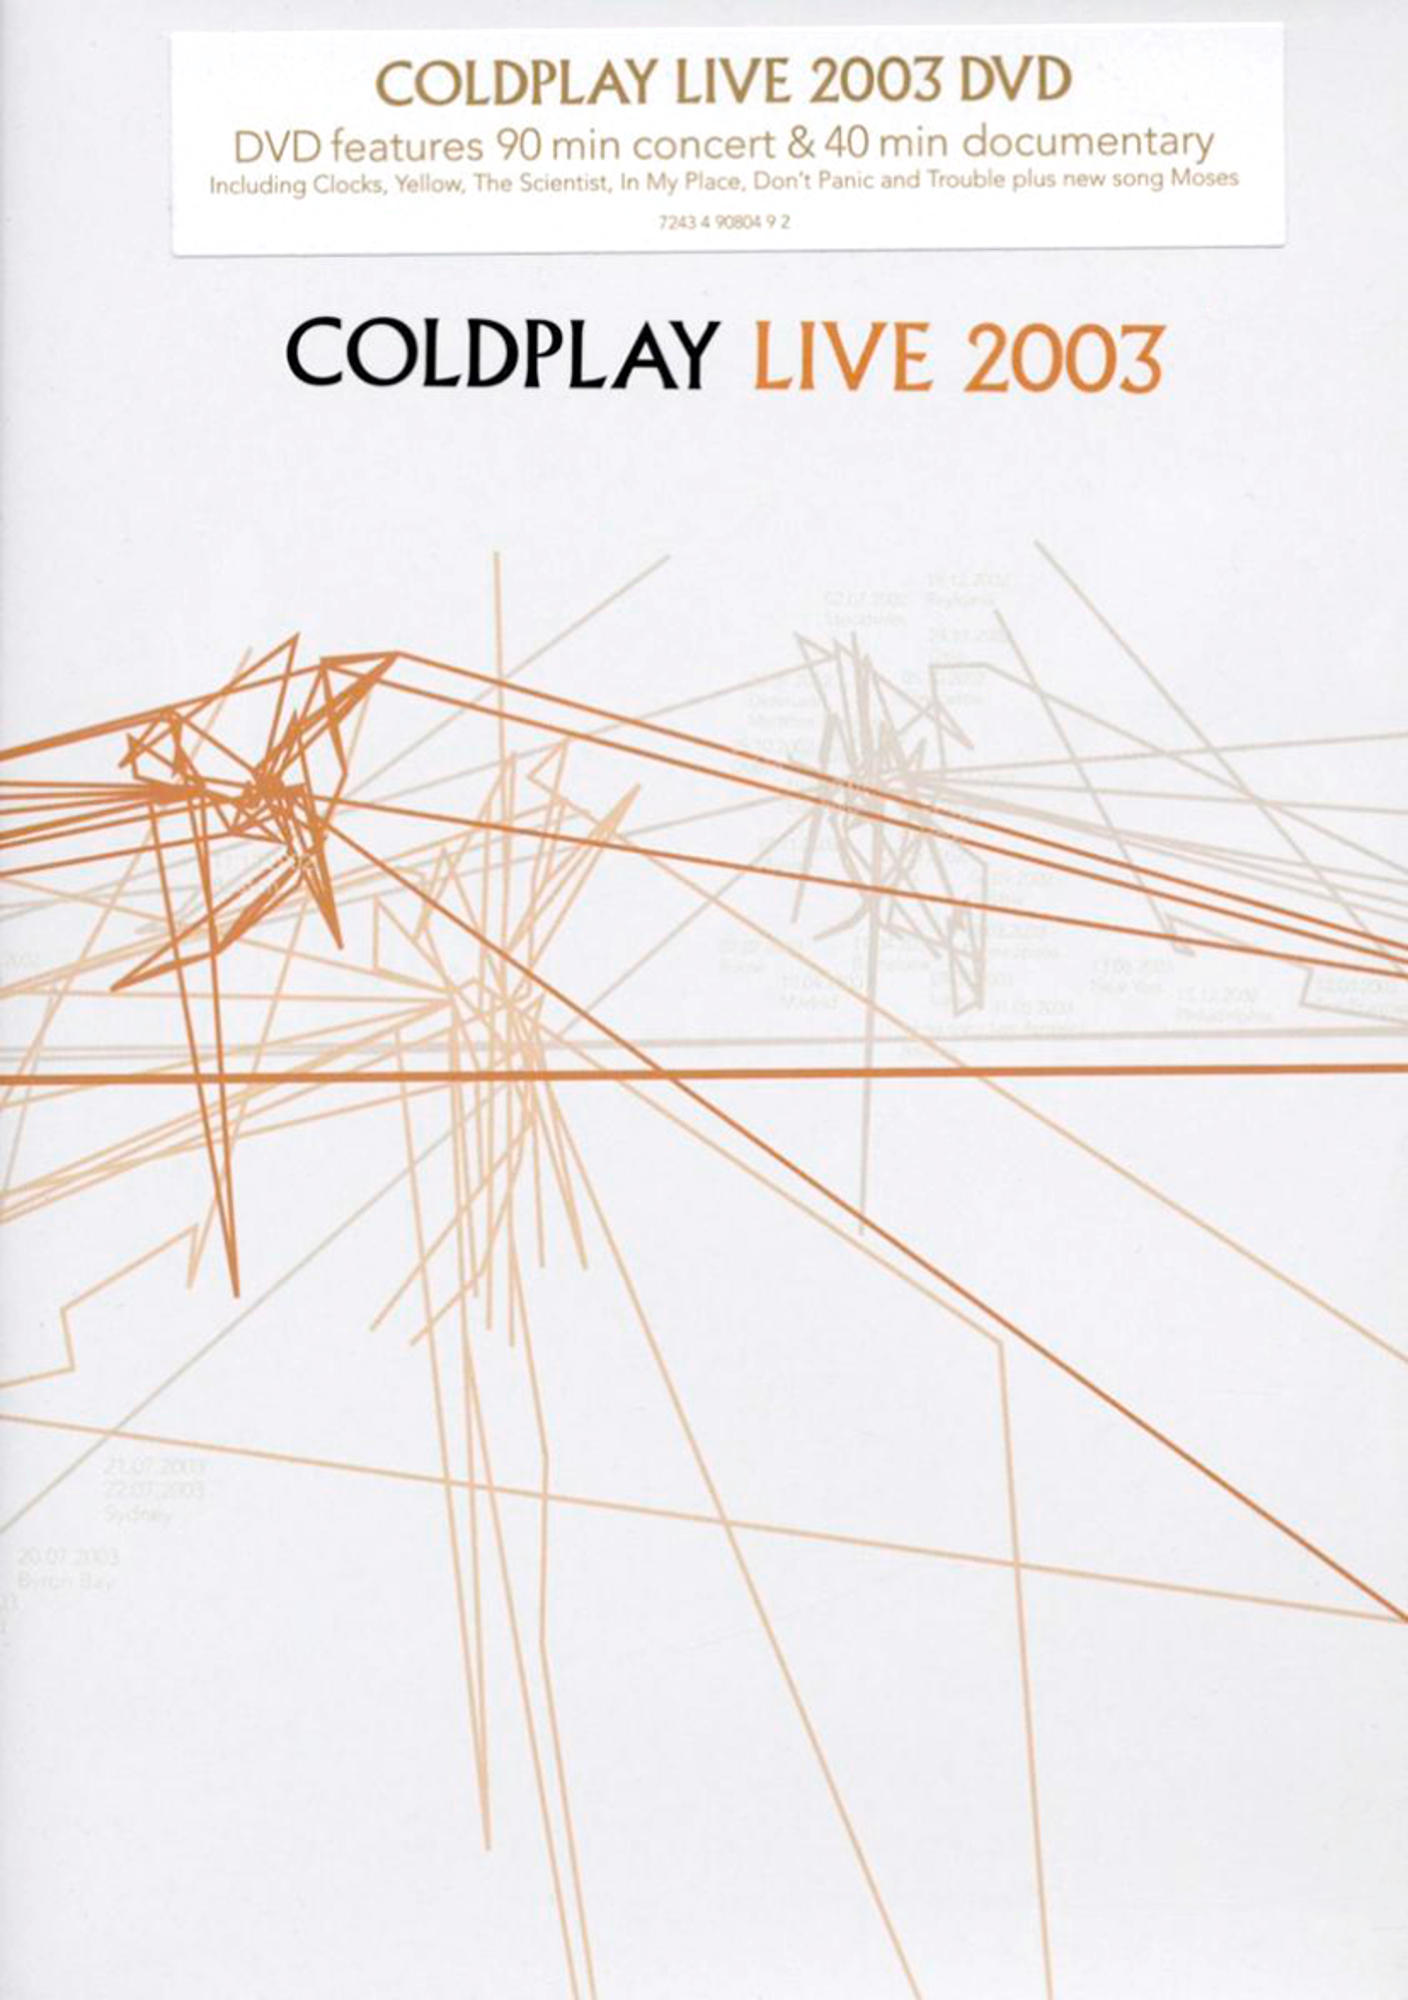 Coldplay - Live (DVD) 2003 